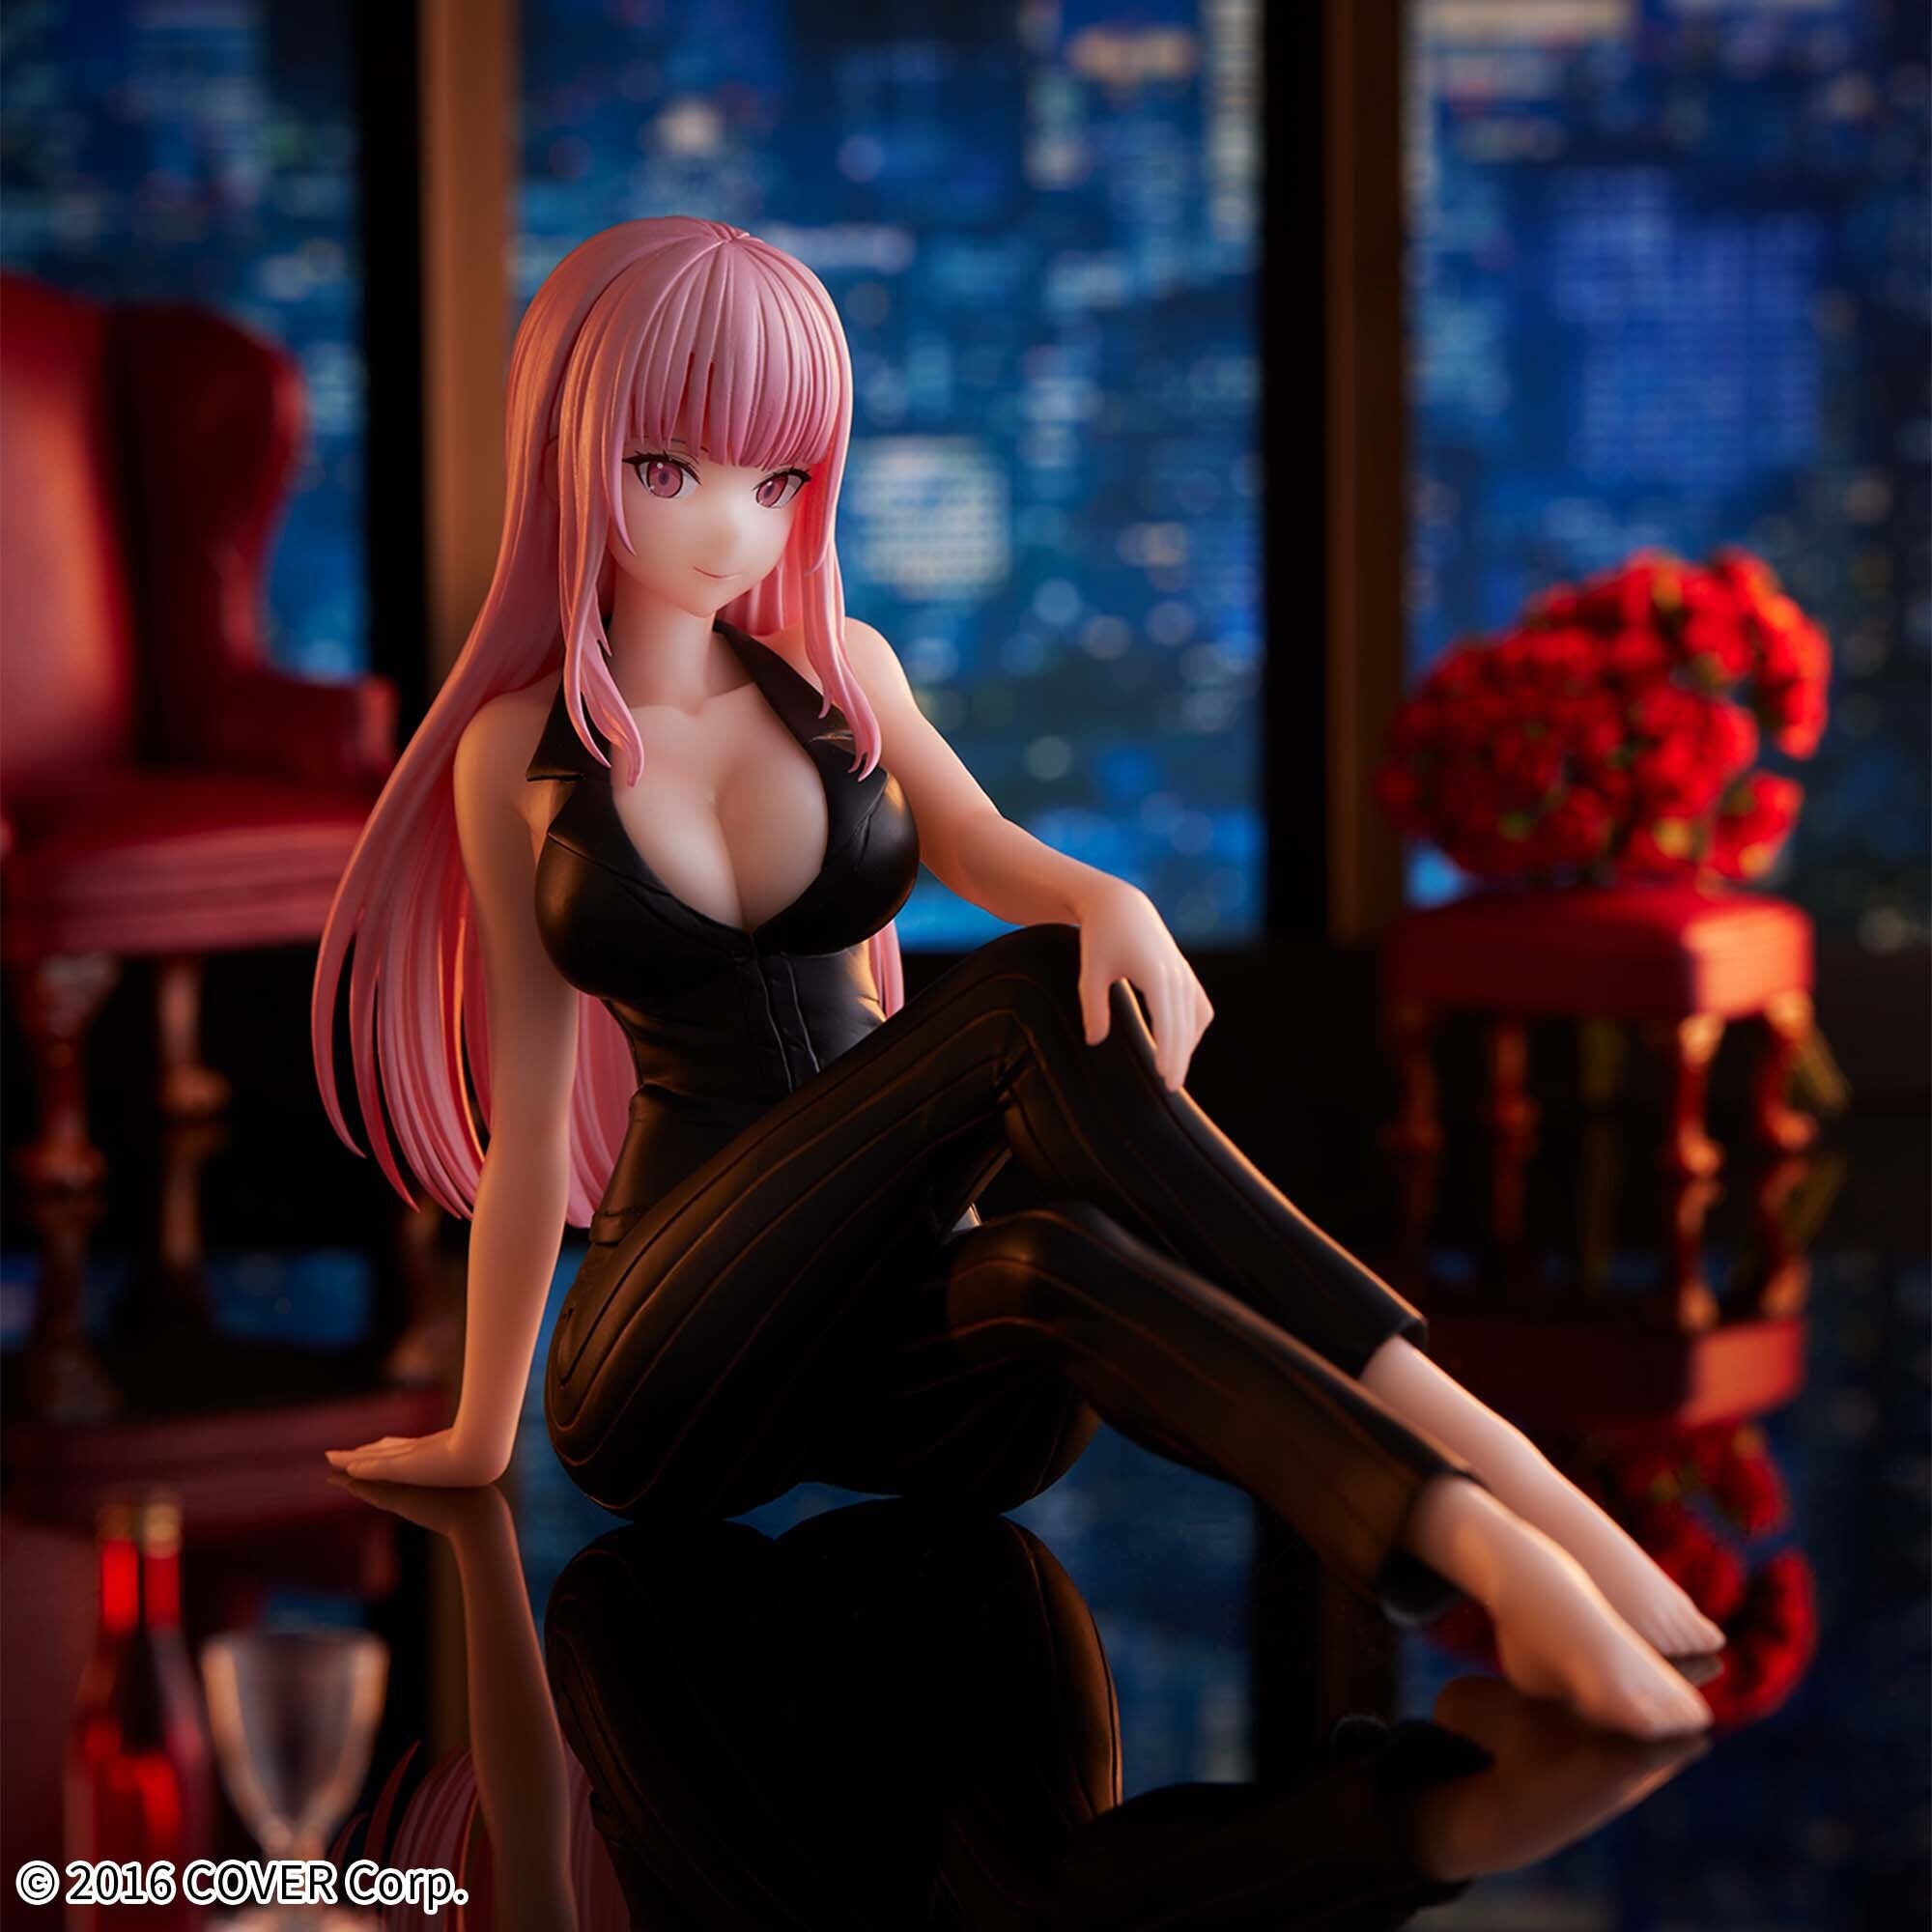 Hololive - Mori Calliope - Relax Time - Office Style Ver. (Bandai